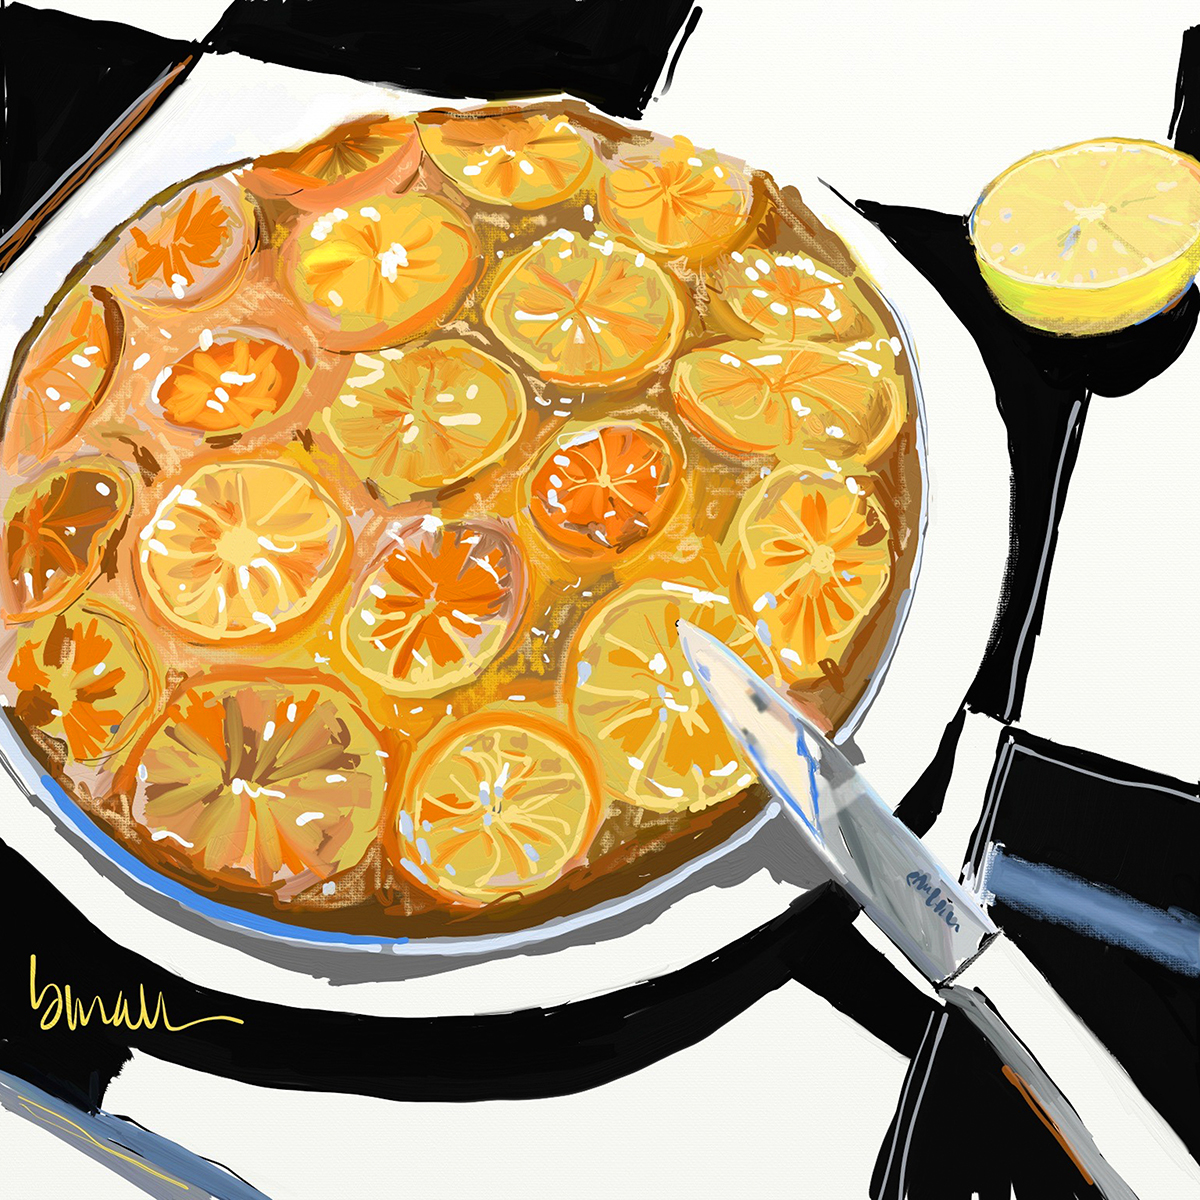 An illustration of a clementine cake on a white plate.